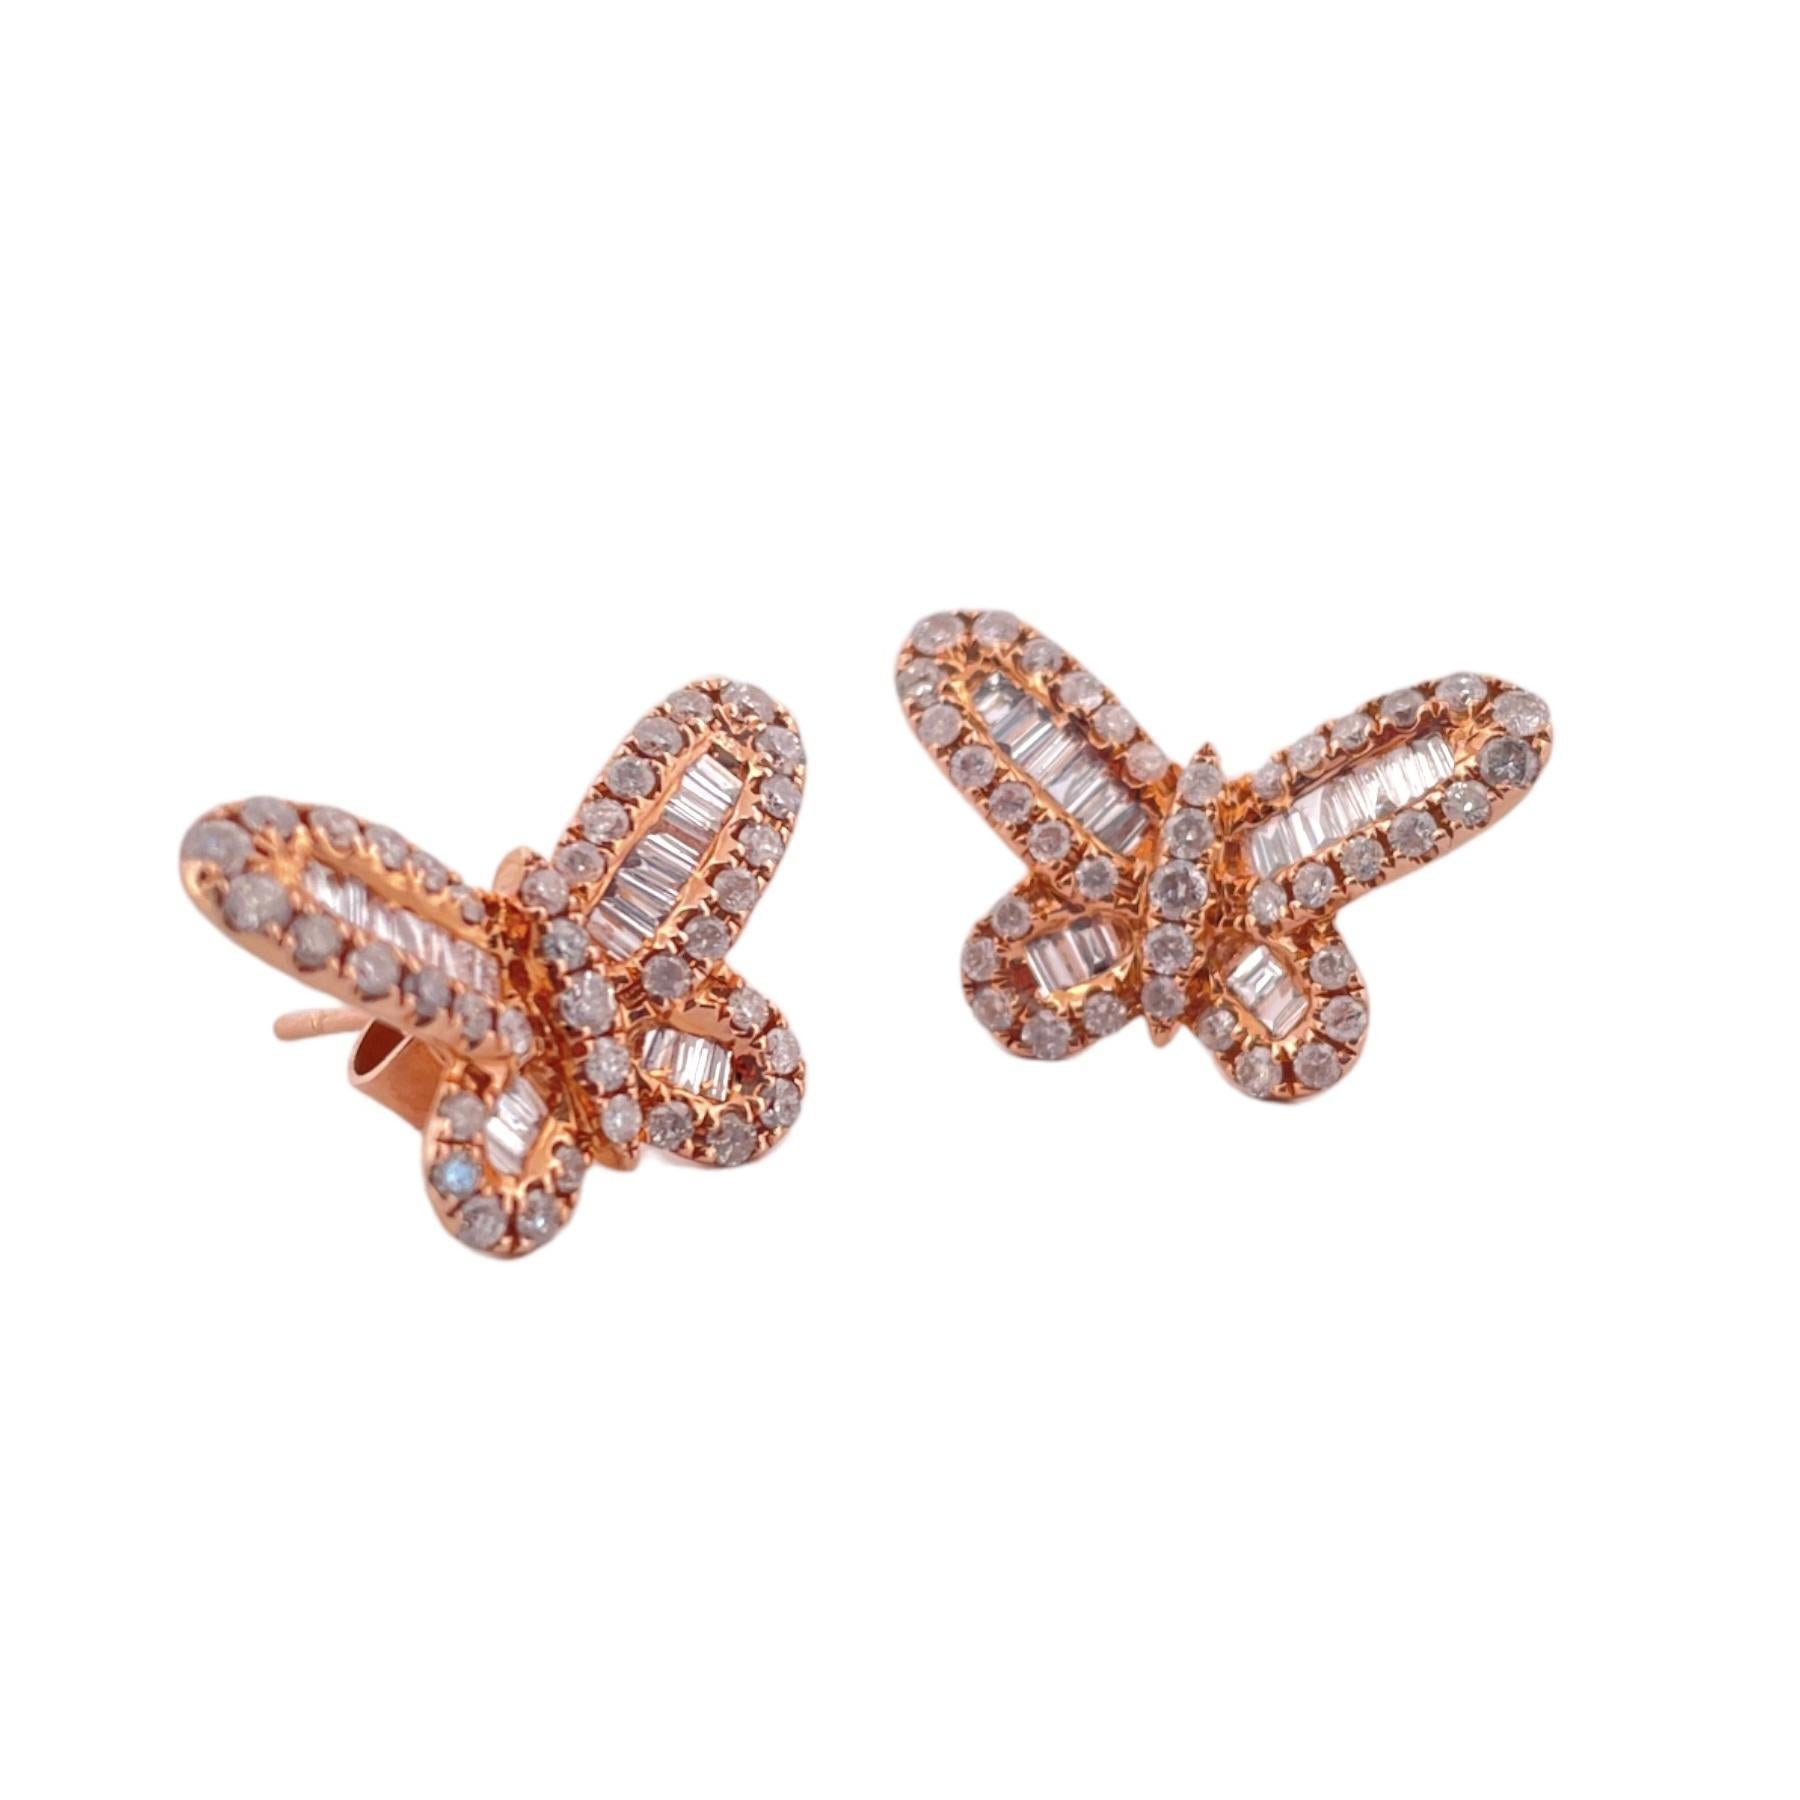 Gorgeous 14K Rose Gold Diamond Butterfly Earring 
This piece weighs 4.6grams, 1.35 ctw of round brilliant.
Ready to soar through the clear sky, a butterfly is both elegant and graceful. These earrings feature fluttering wings filled with round and